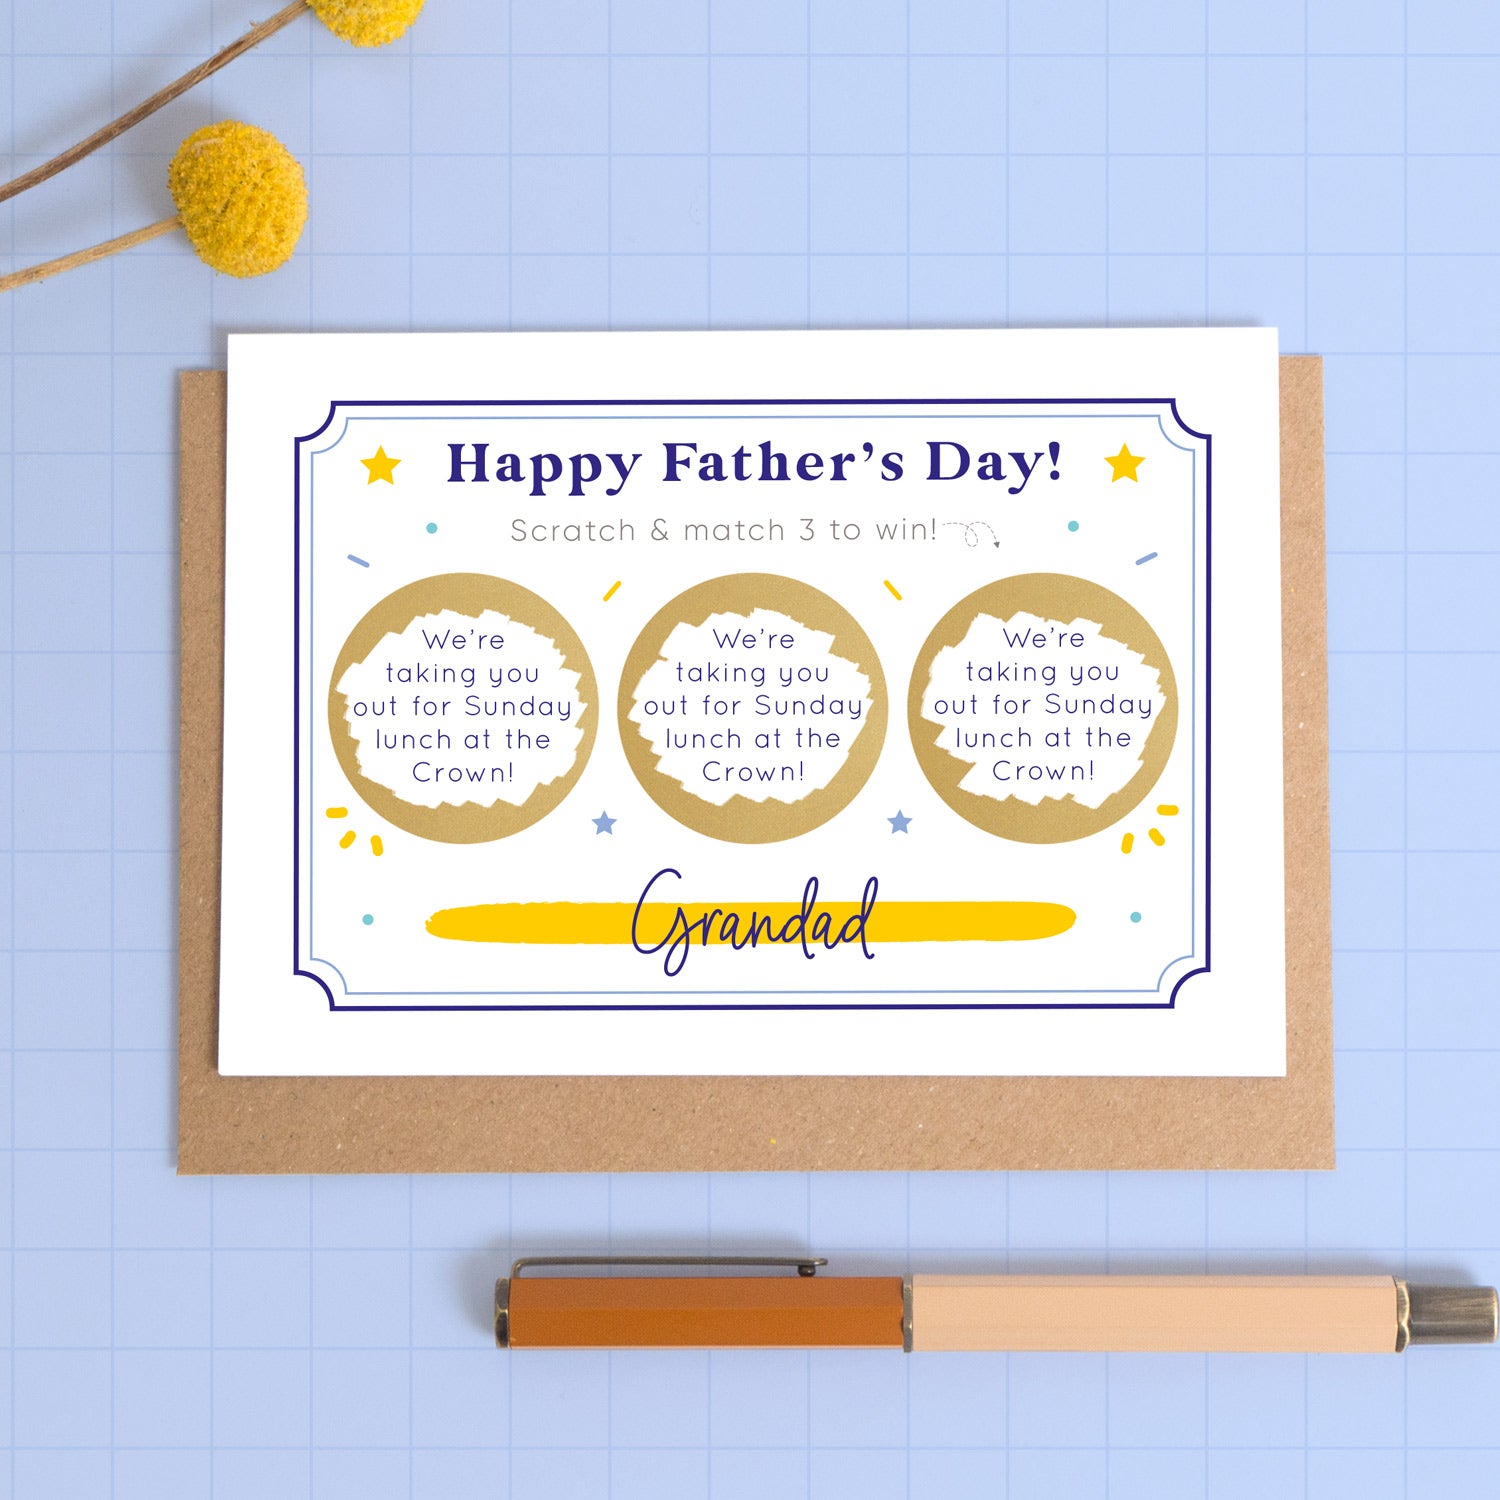 A personalised Father’s day scratch three to win style scratch card photographed on a blue background with a pop of yellow flowers and a pen for scale. This image shows the blue version of the card with the golden circles scratched off to reveal the message.